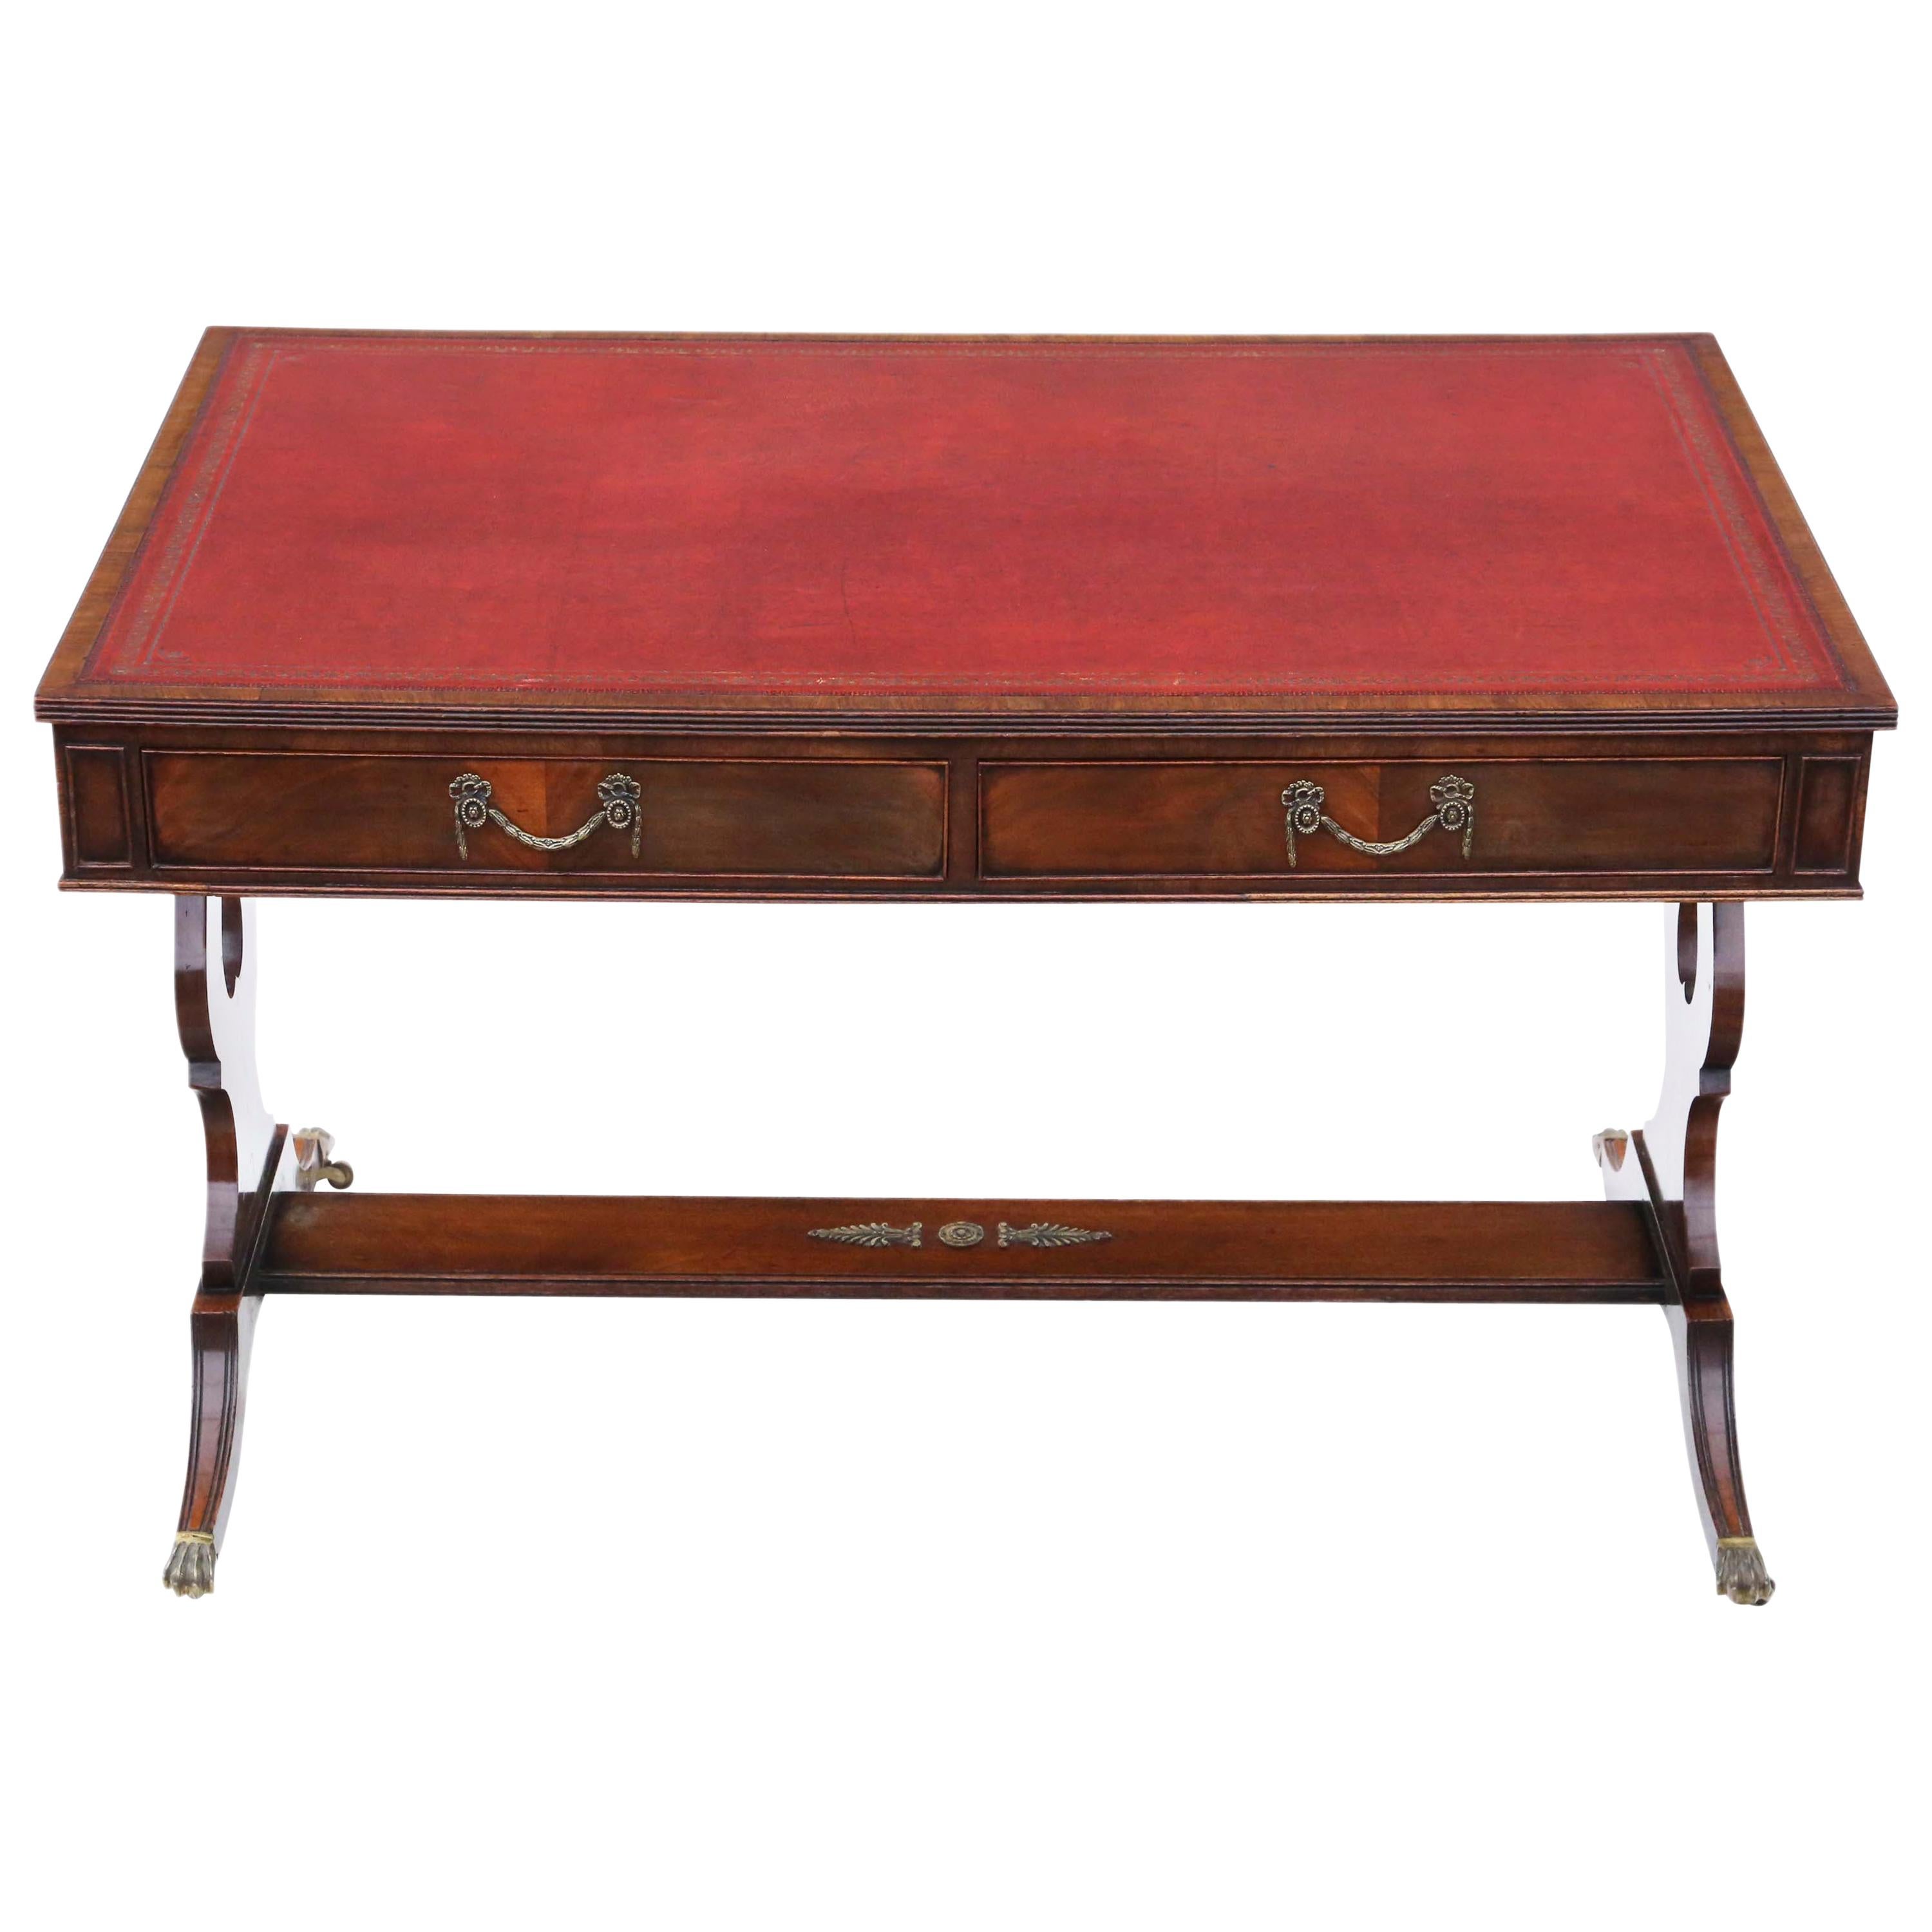 Antique Flame Mahogany Writing Table Desk 19th Century Revival, C1920